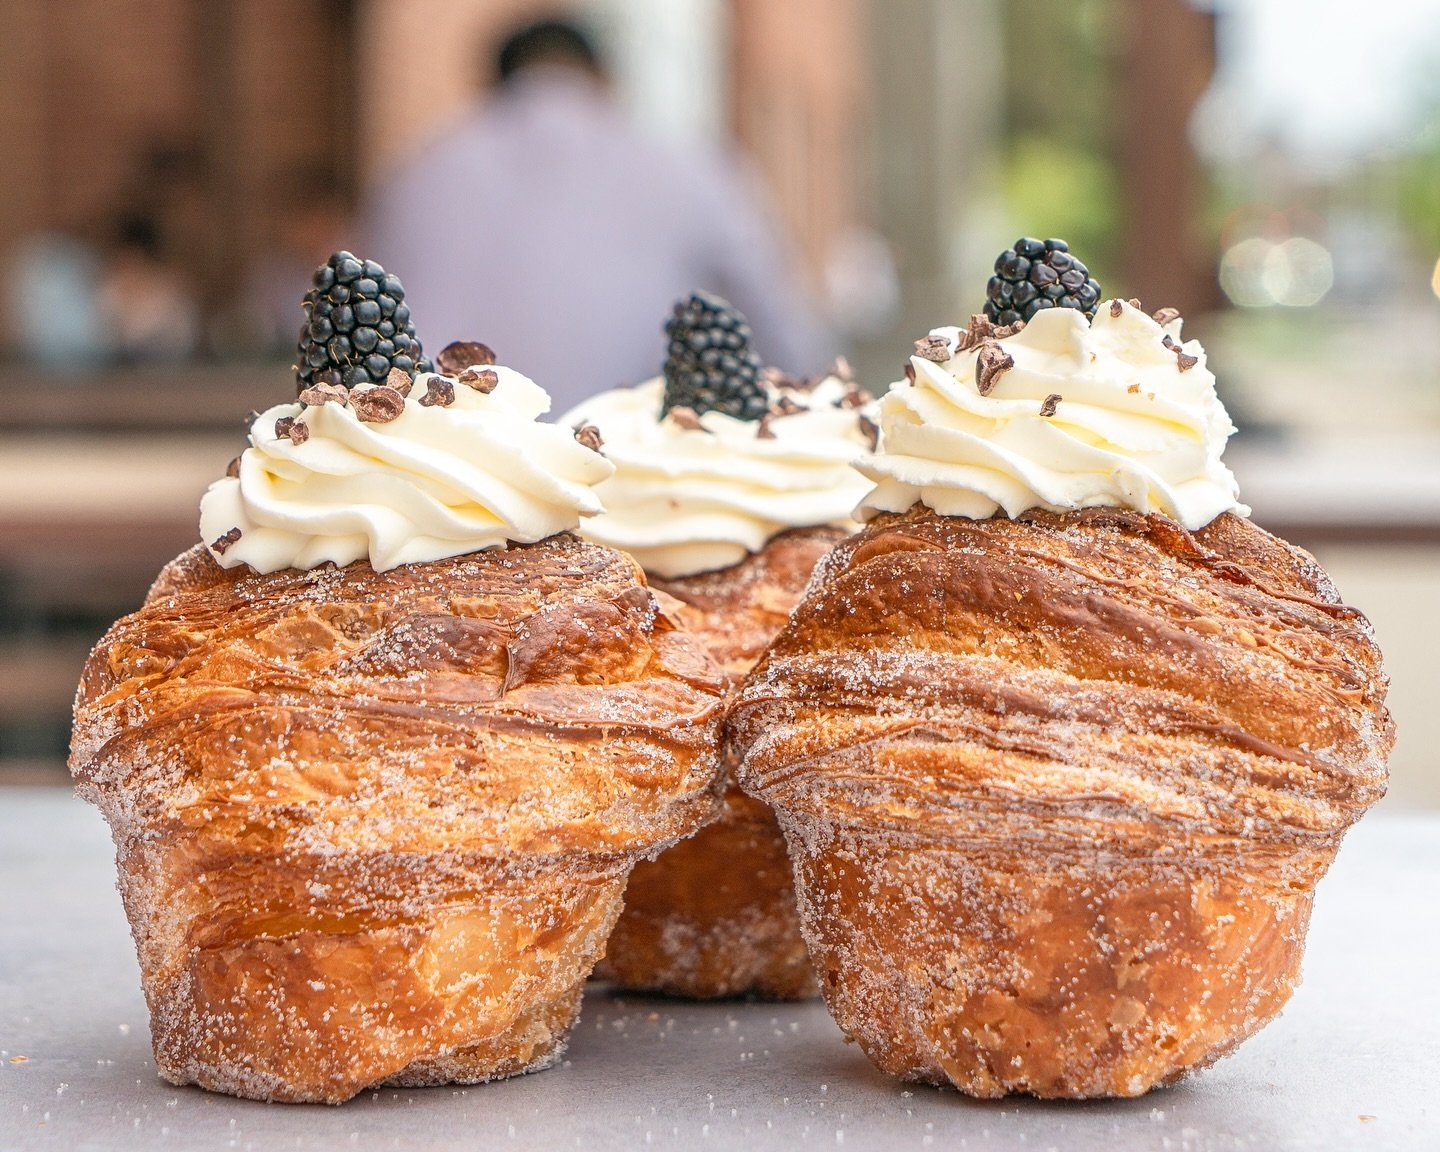 BLACKBERRY CRUFFIN! 🖤💗

Springtime calls for fresh berries, and our Blackberry Cruffin delivers! 

Imagine our classic Cruffin, but with a twist: layers of flaky pastry filled with fresh blackberry gel and mascarpone cream, coated with sugar, and c